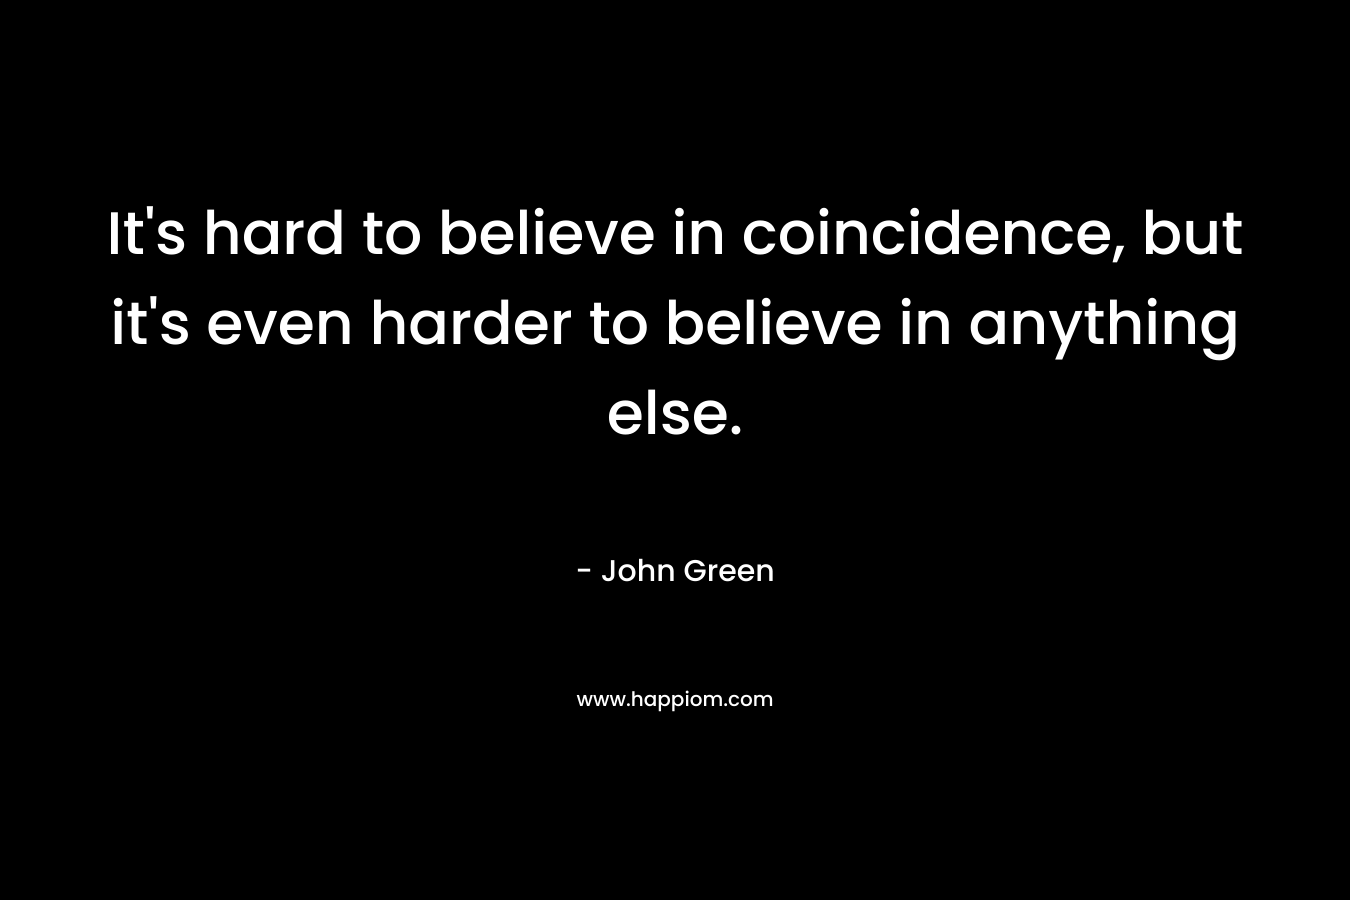 It's hard to believe in coincidence, but it's even harder to believe in anything else.